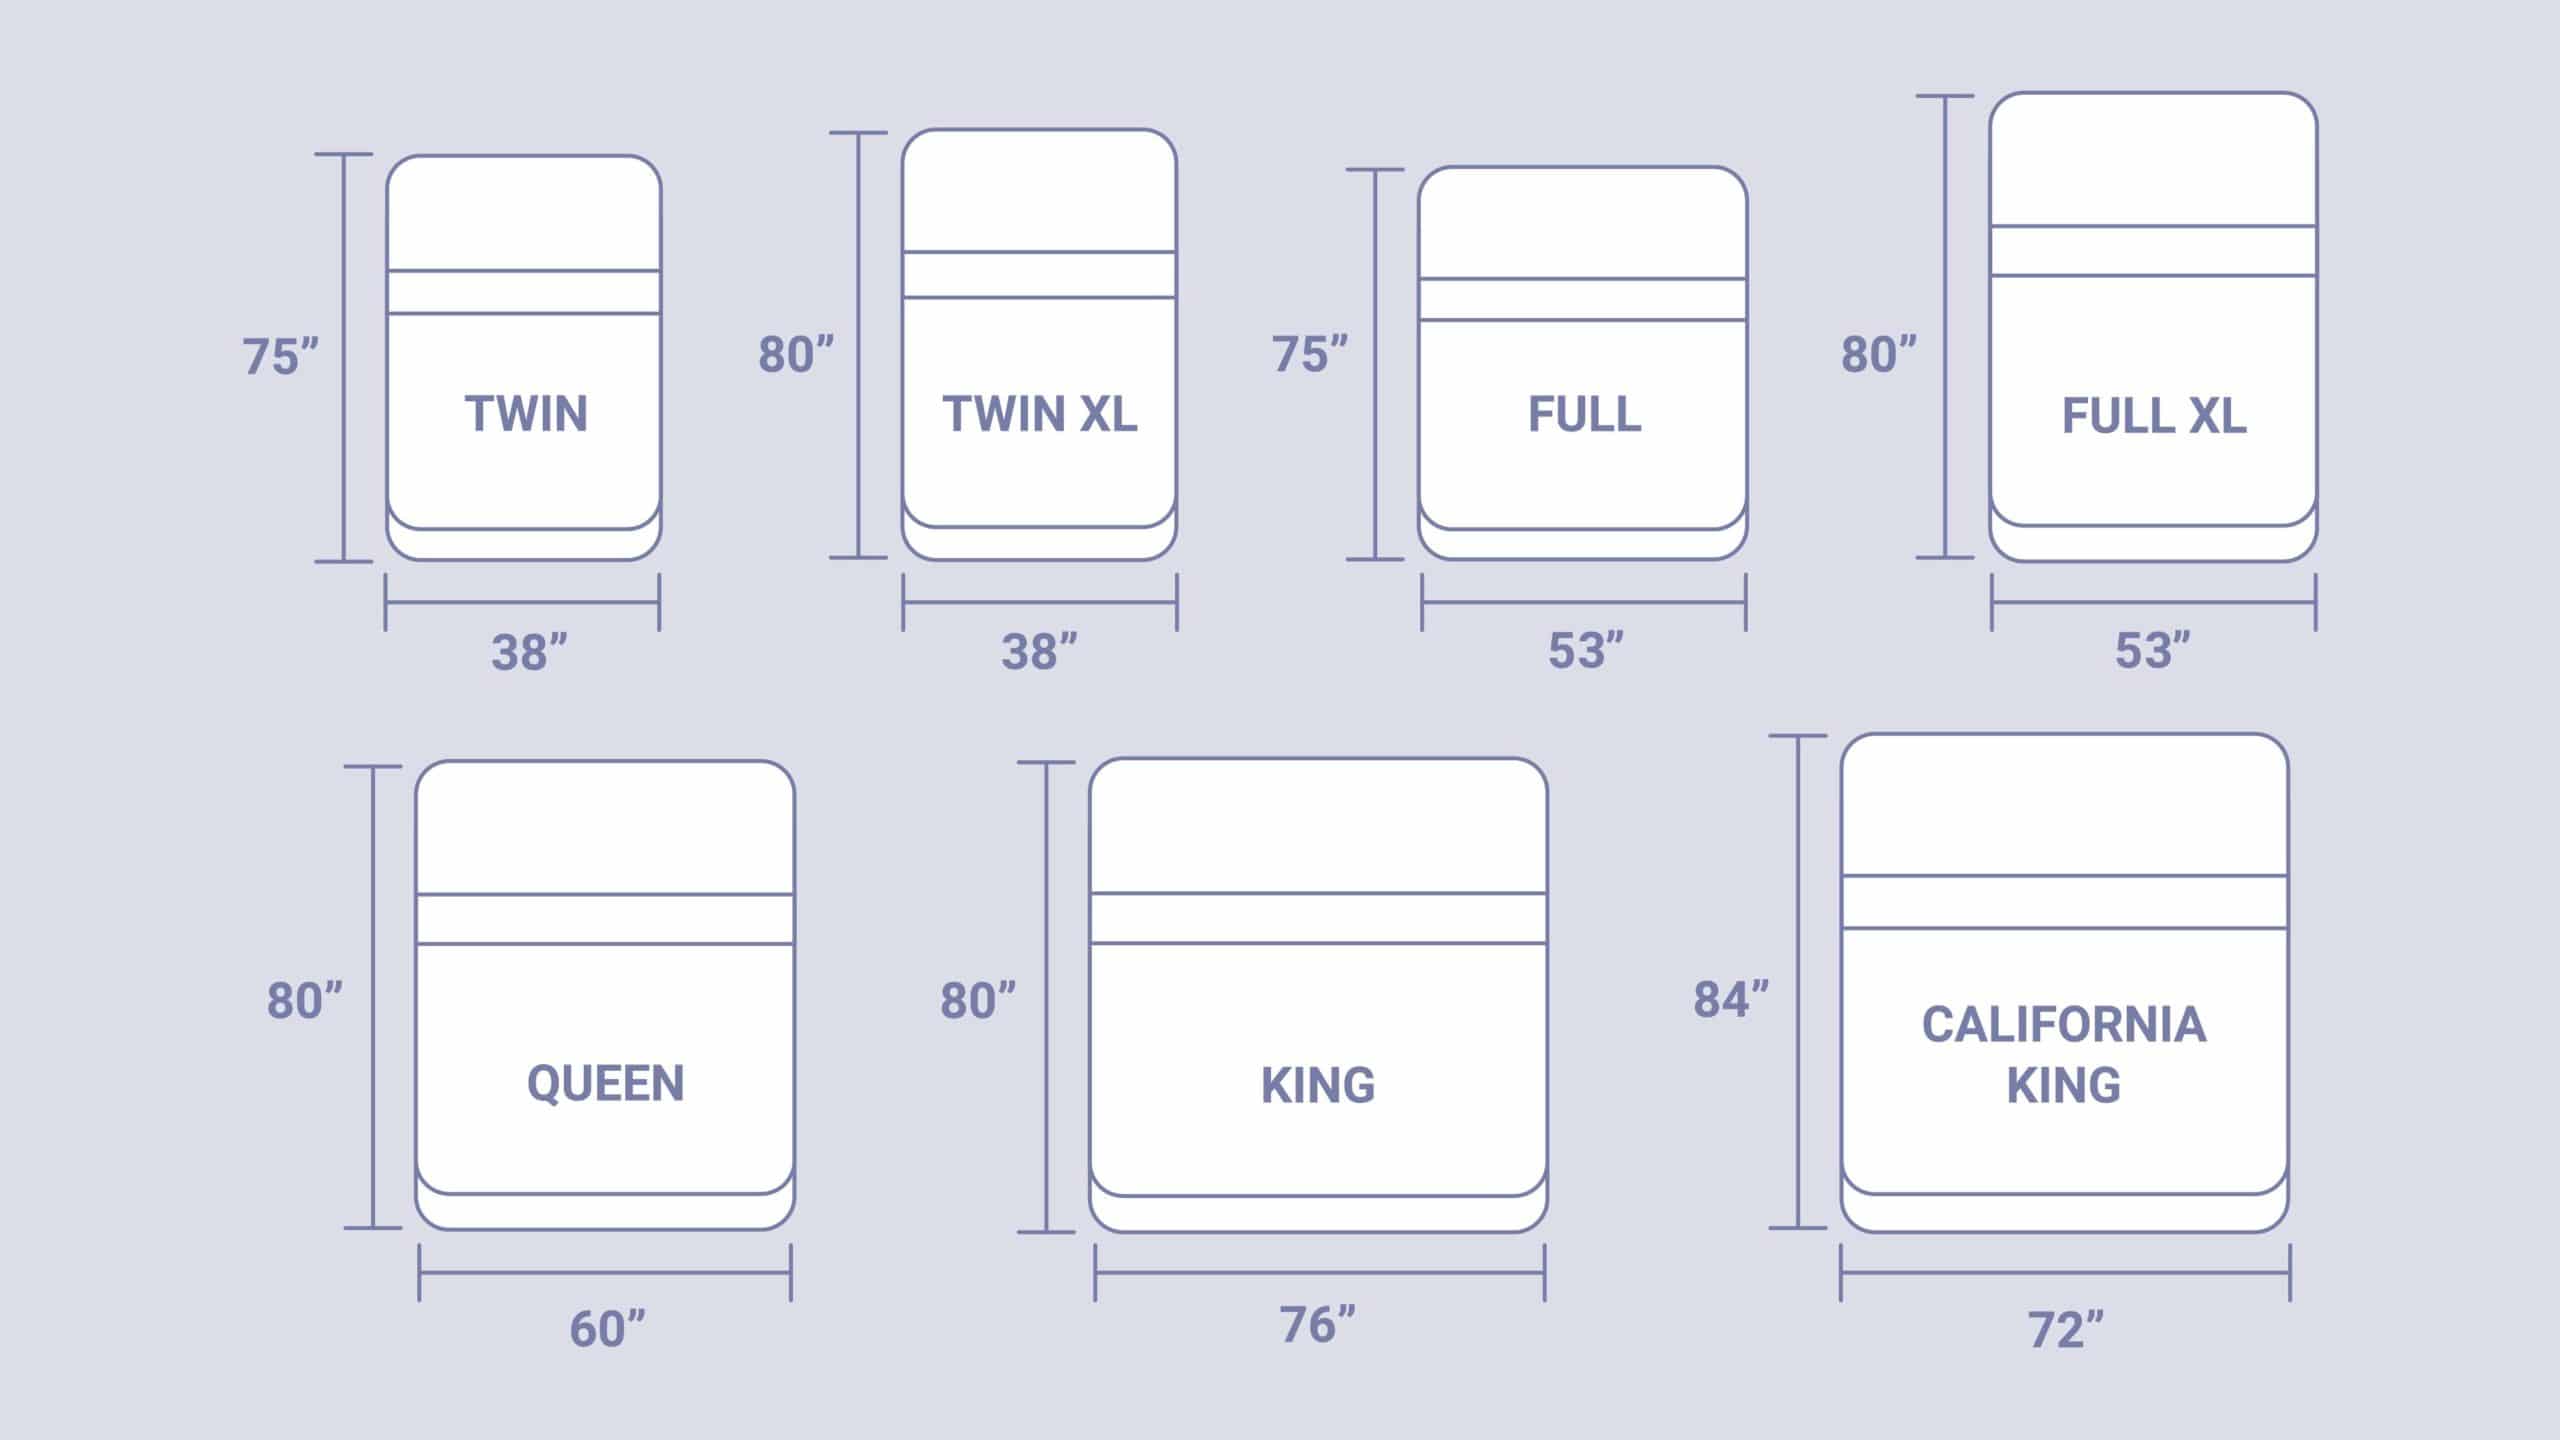 Mattress Sizes And Dimensions Guide, How Long Is A Normal Twin Size Bed